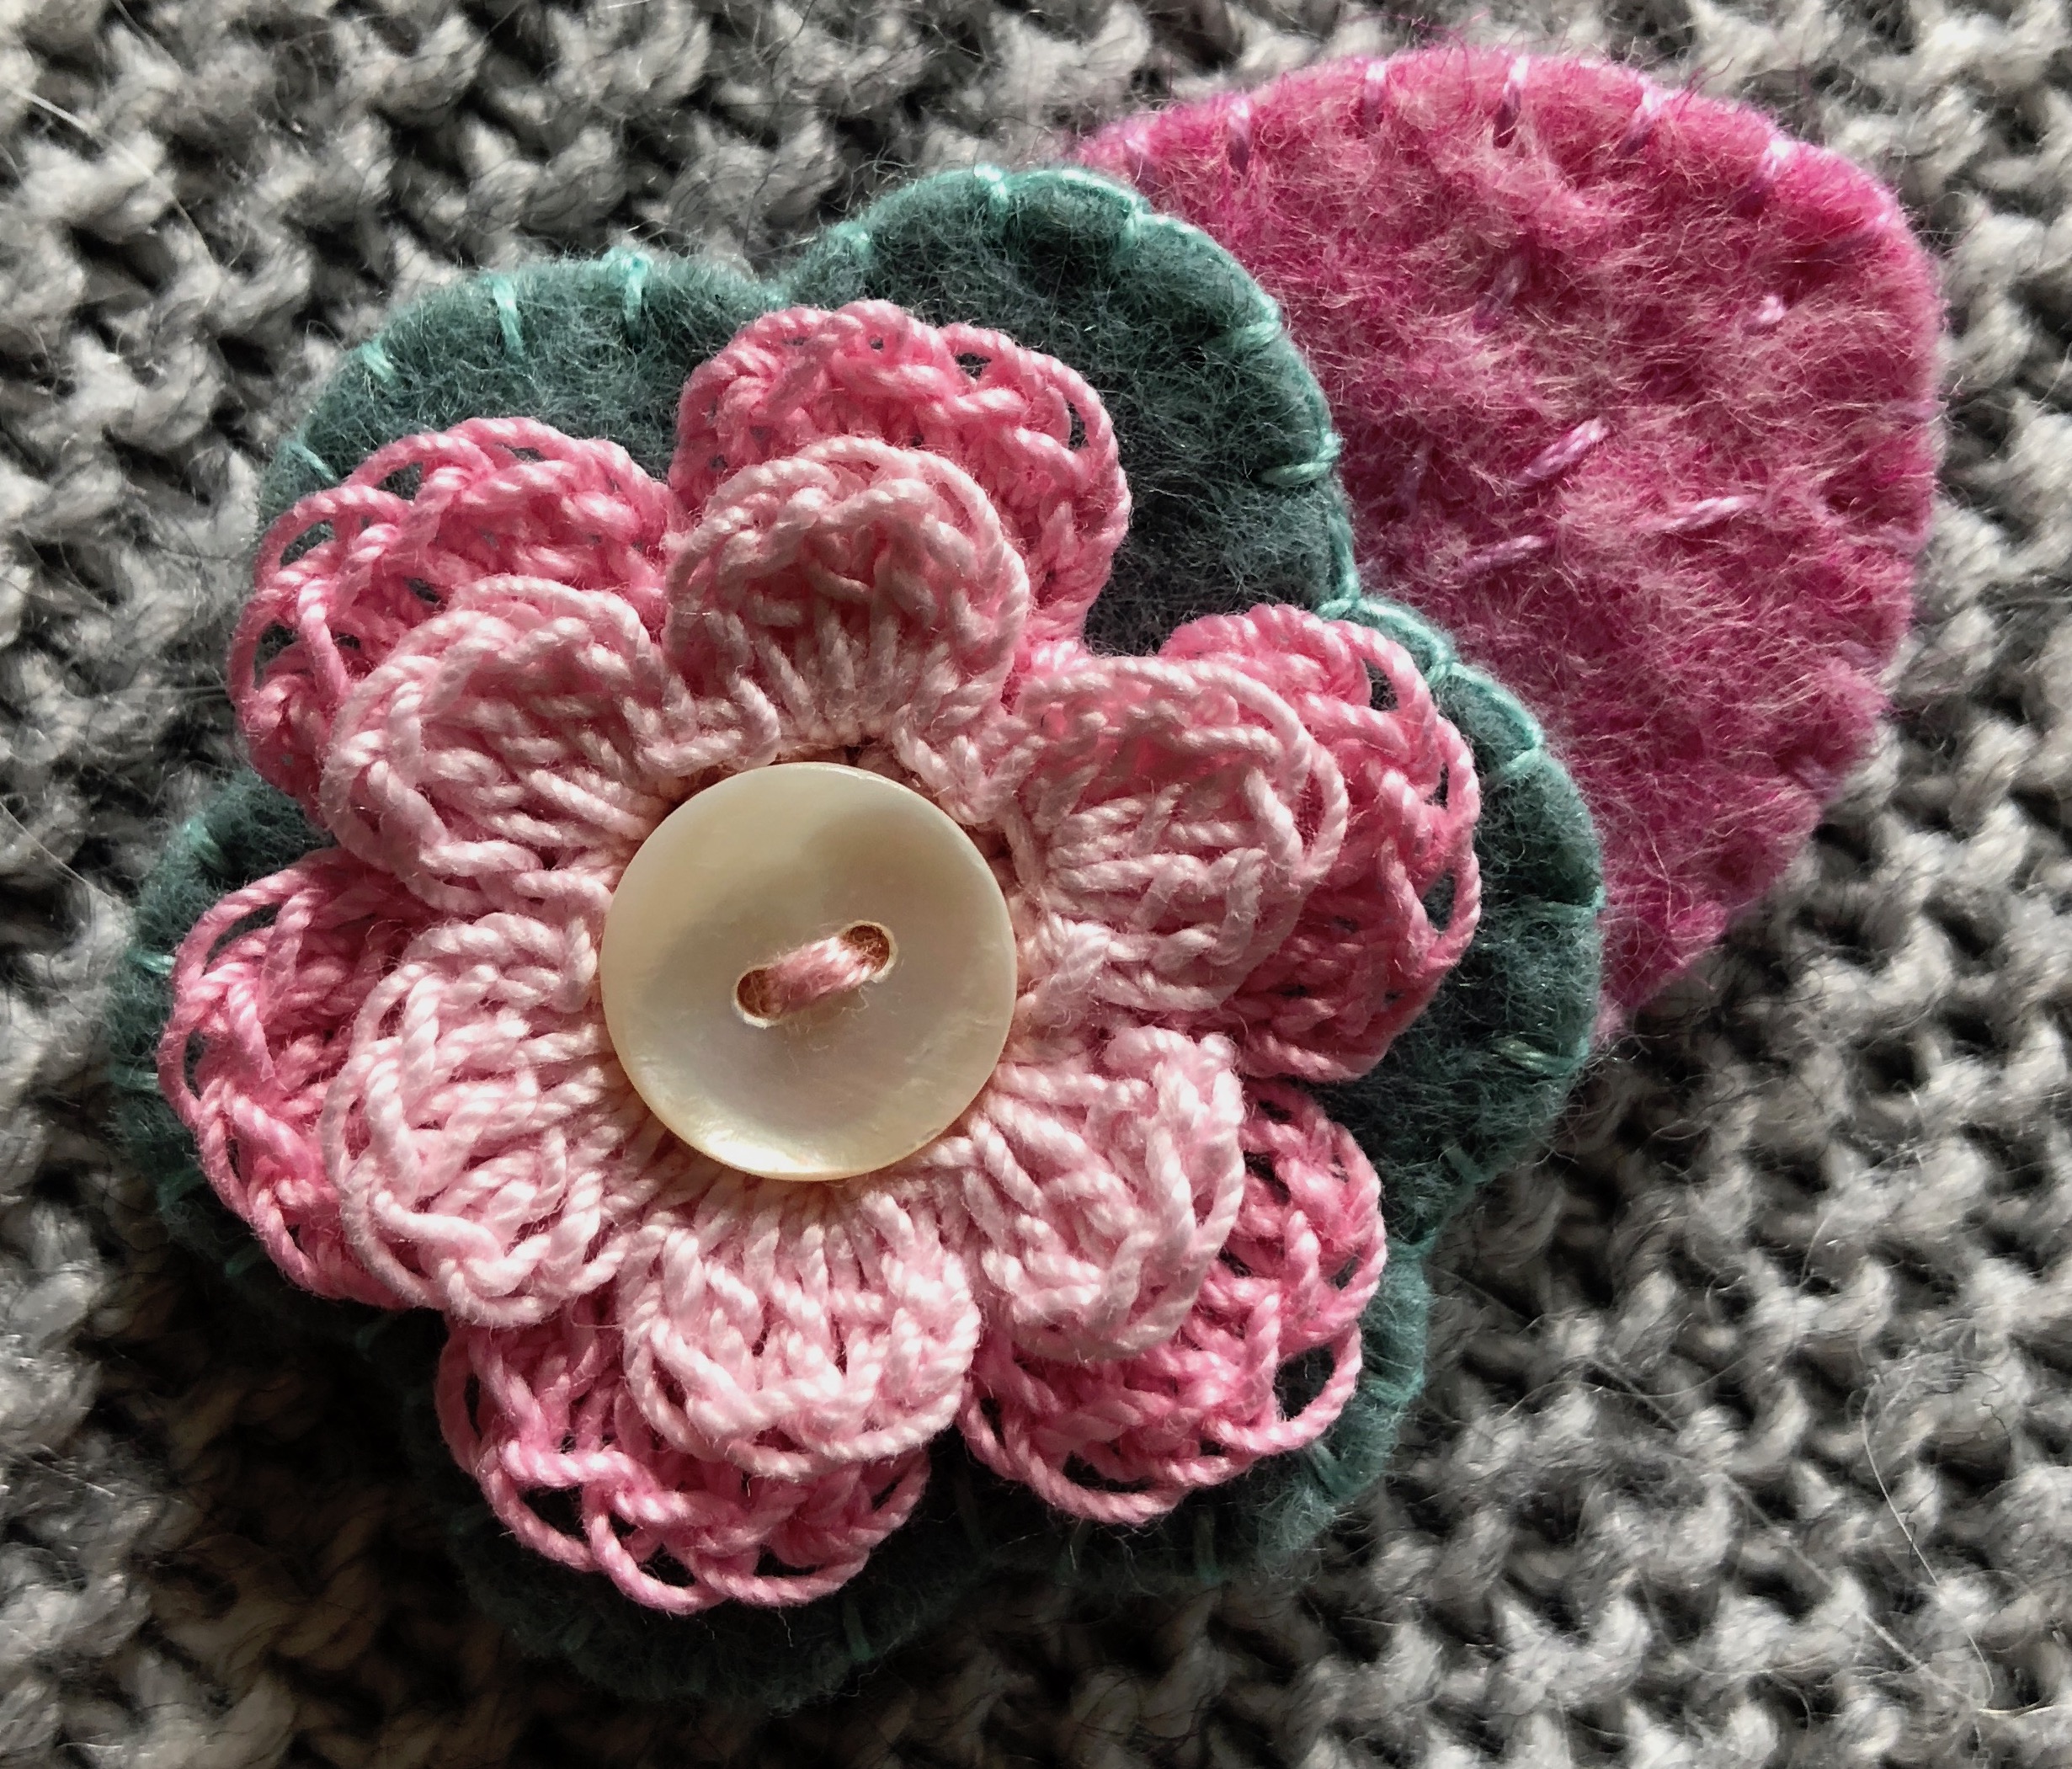 Small hand stitched felt and crocheted flower brooch in pink sand pale grey with mother of pearl button centre.